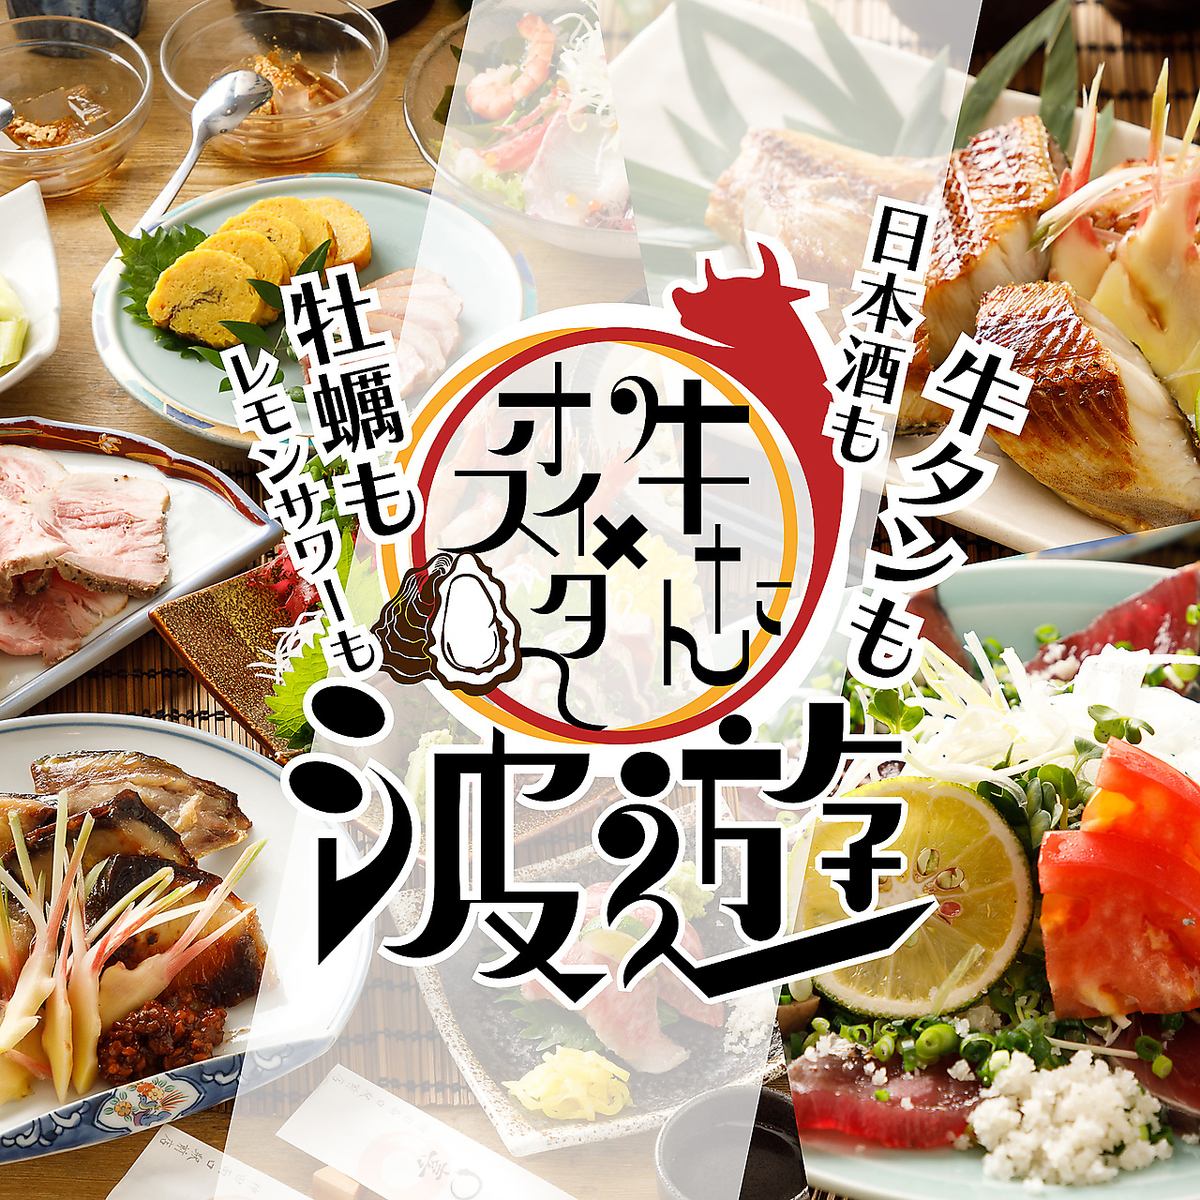 There is also an all-you-can-drink option! Please order your favorite dishes♪